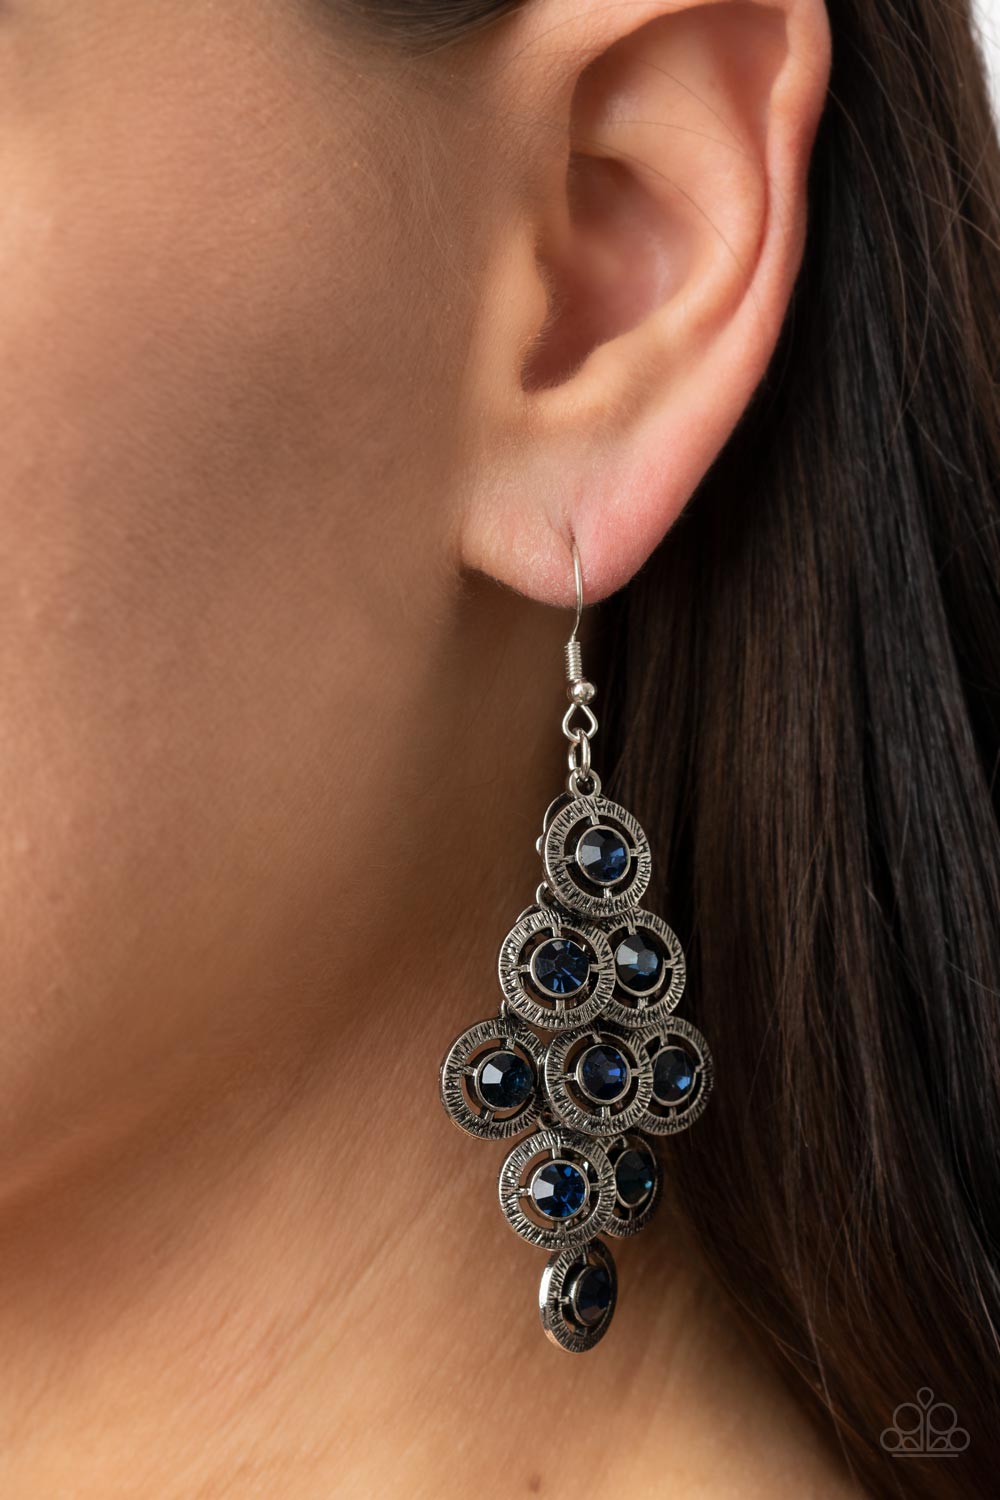 Constellation Cruise Blue Earrings - Paparazzi Accessories-on model - CarasShop.com - $5 Jewelry by Cara Jewels